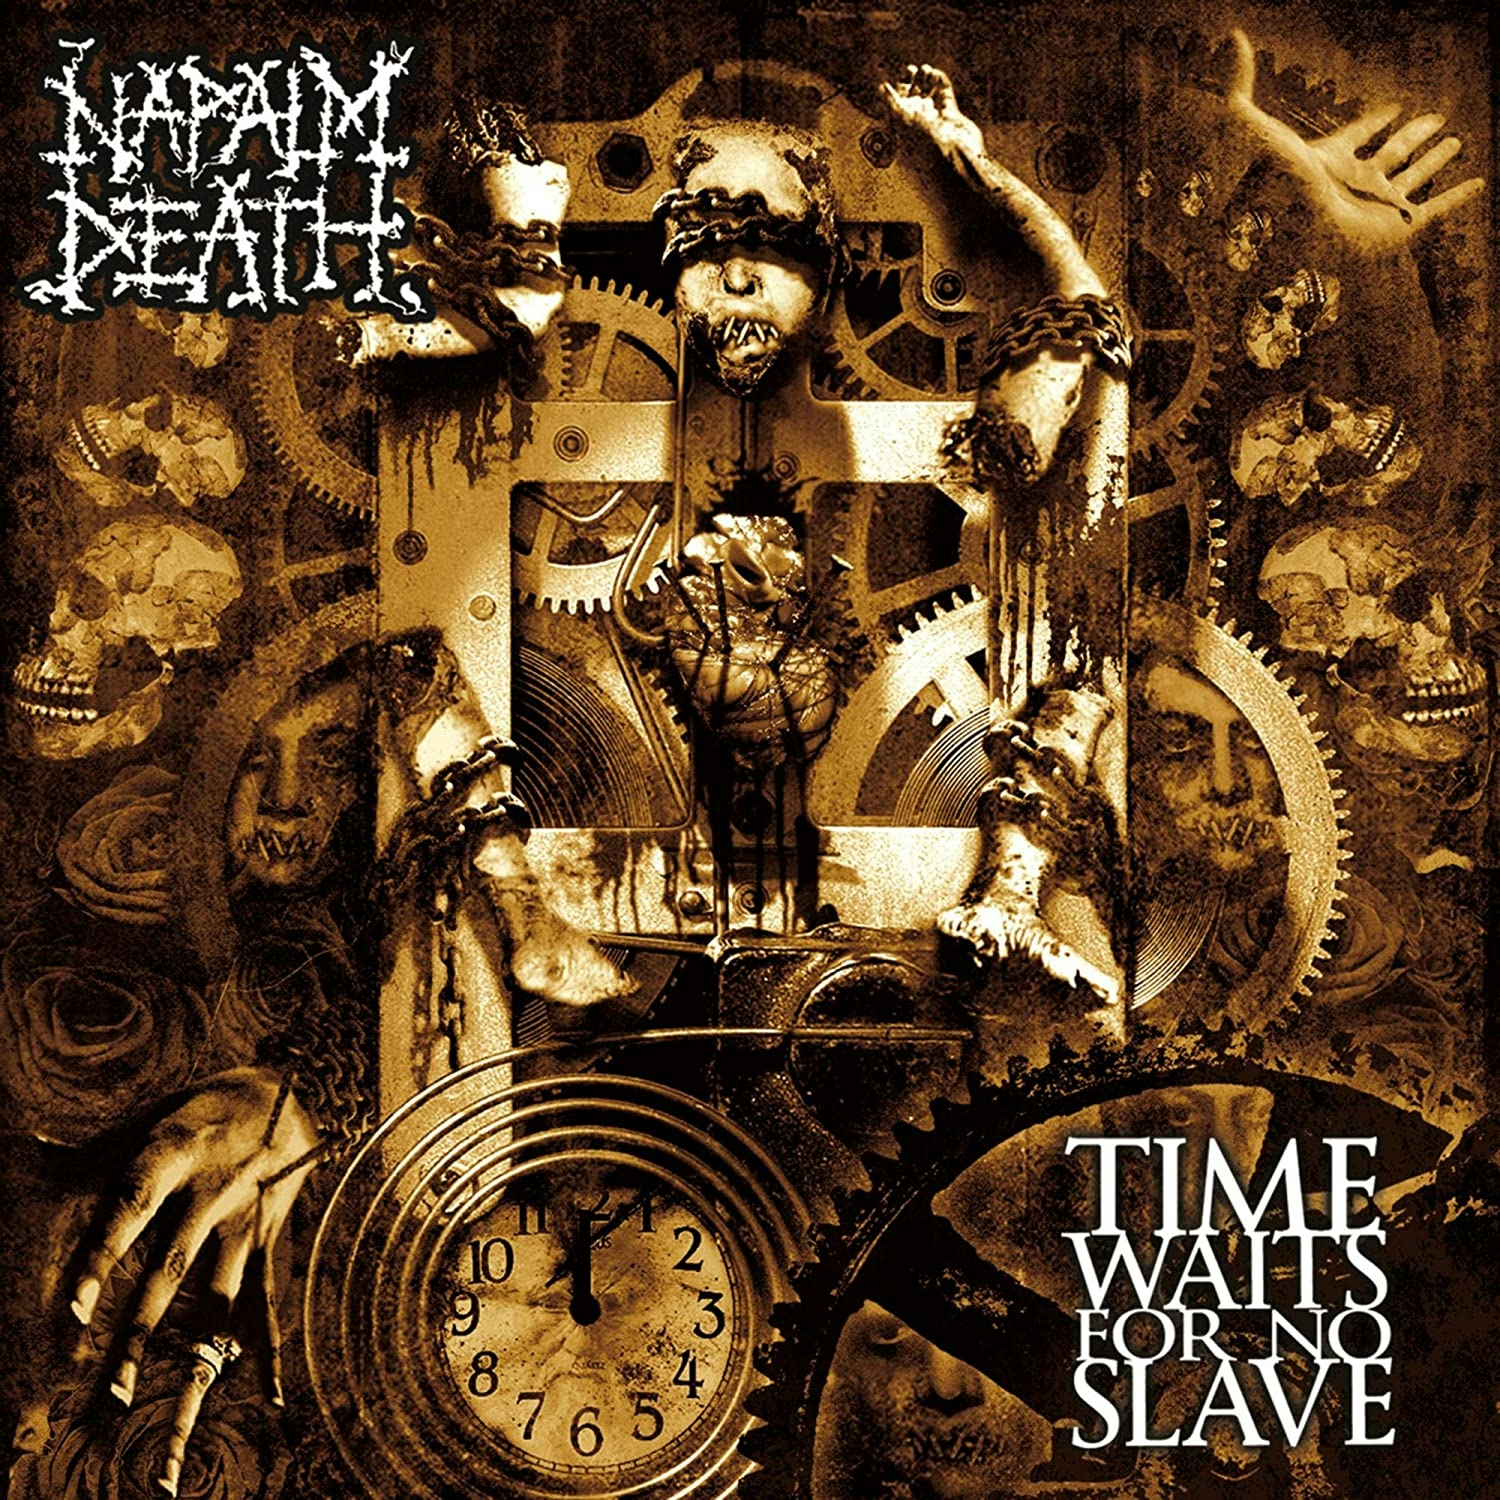 Album artwork for Album artwork for Time Waits For No Slave by Napalm Death by Time Waits For No Slave - Napalm Death